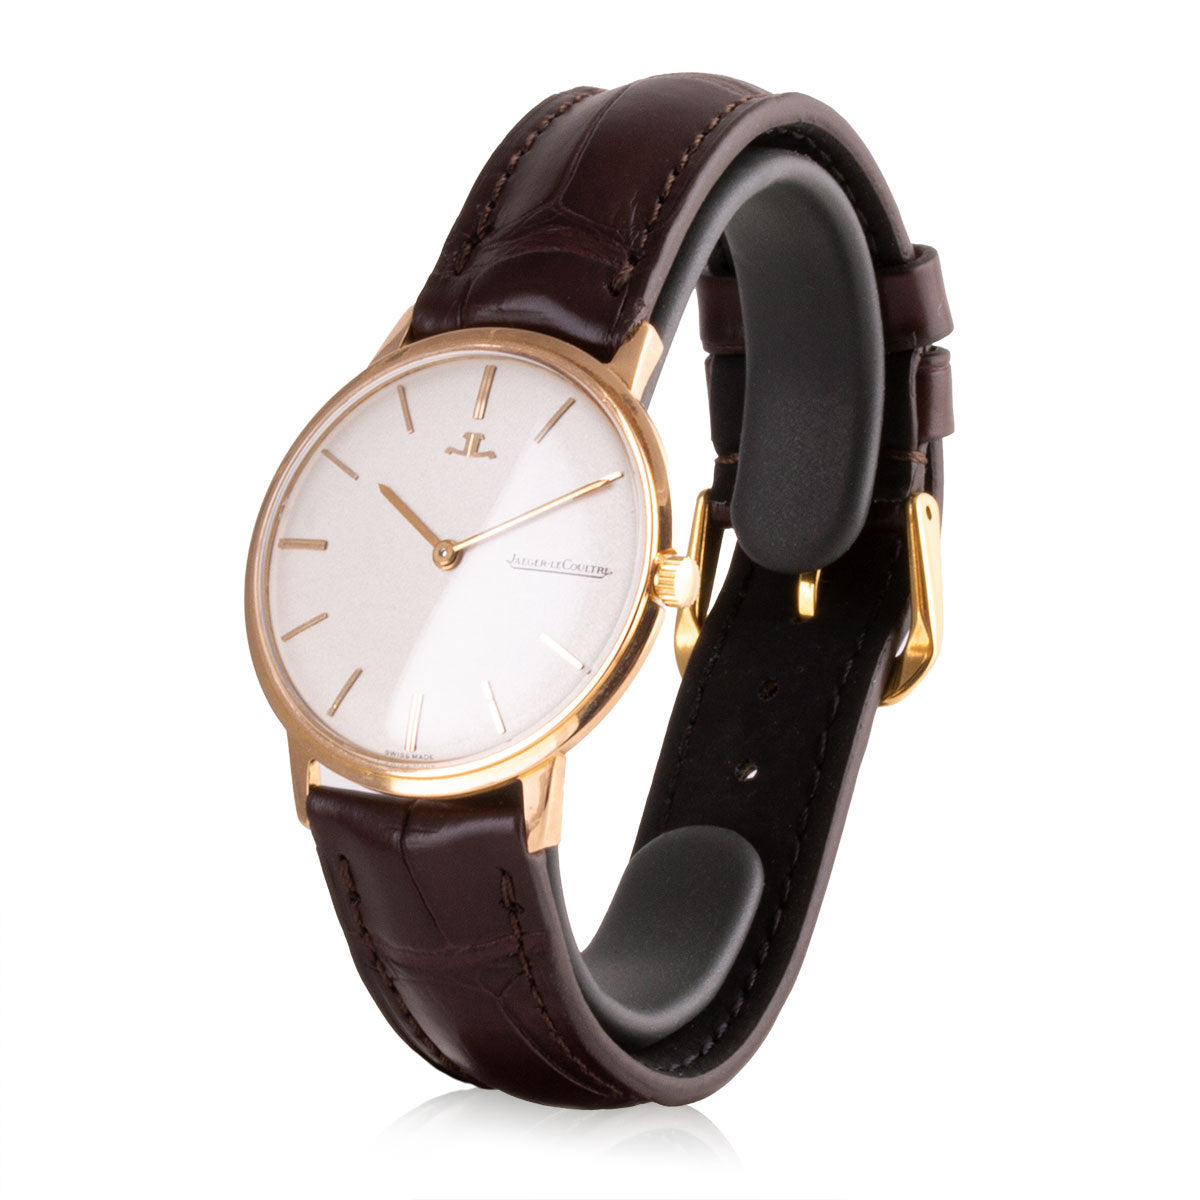 Second-hand watch - Jaeger Lecoultre - 2900€